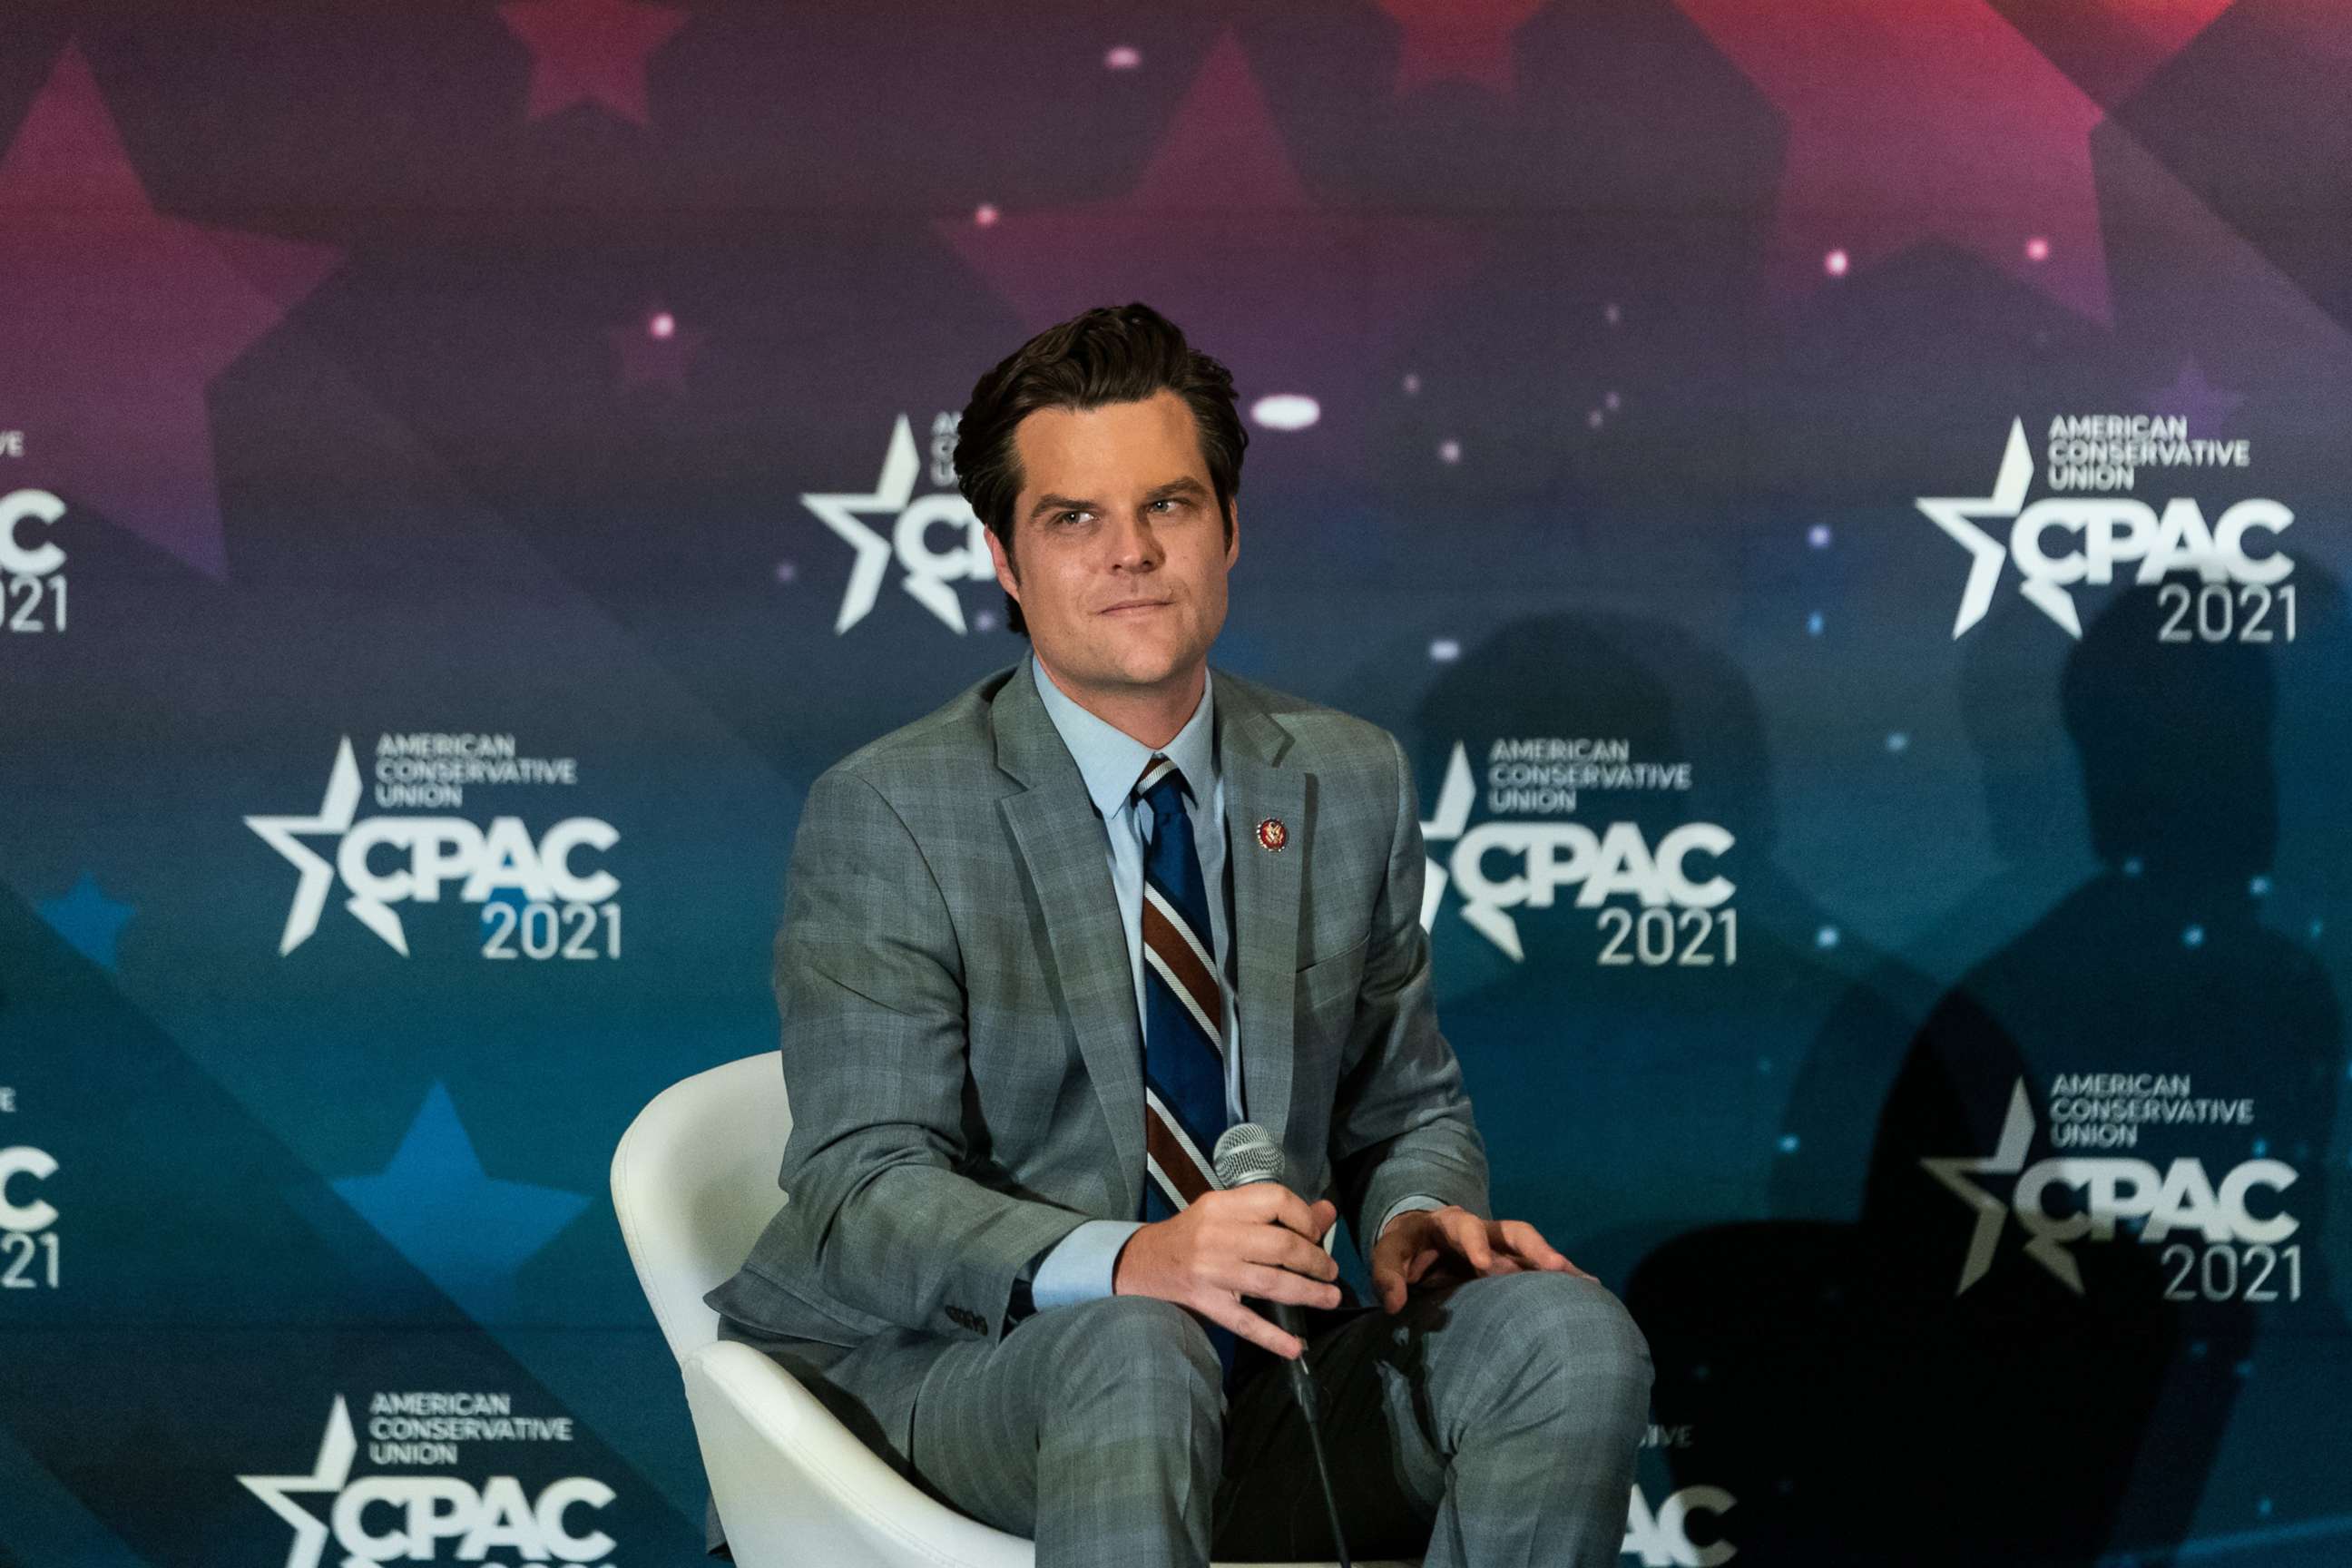 PHOTO: Rep. Matt Gaetz listens during a panel at the Conservative Political Action Conference (CPAC) in Orlando, Fla., Feb. 27, 2021.